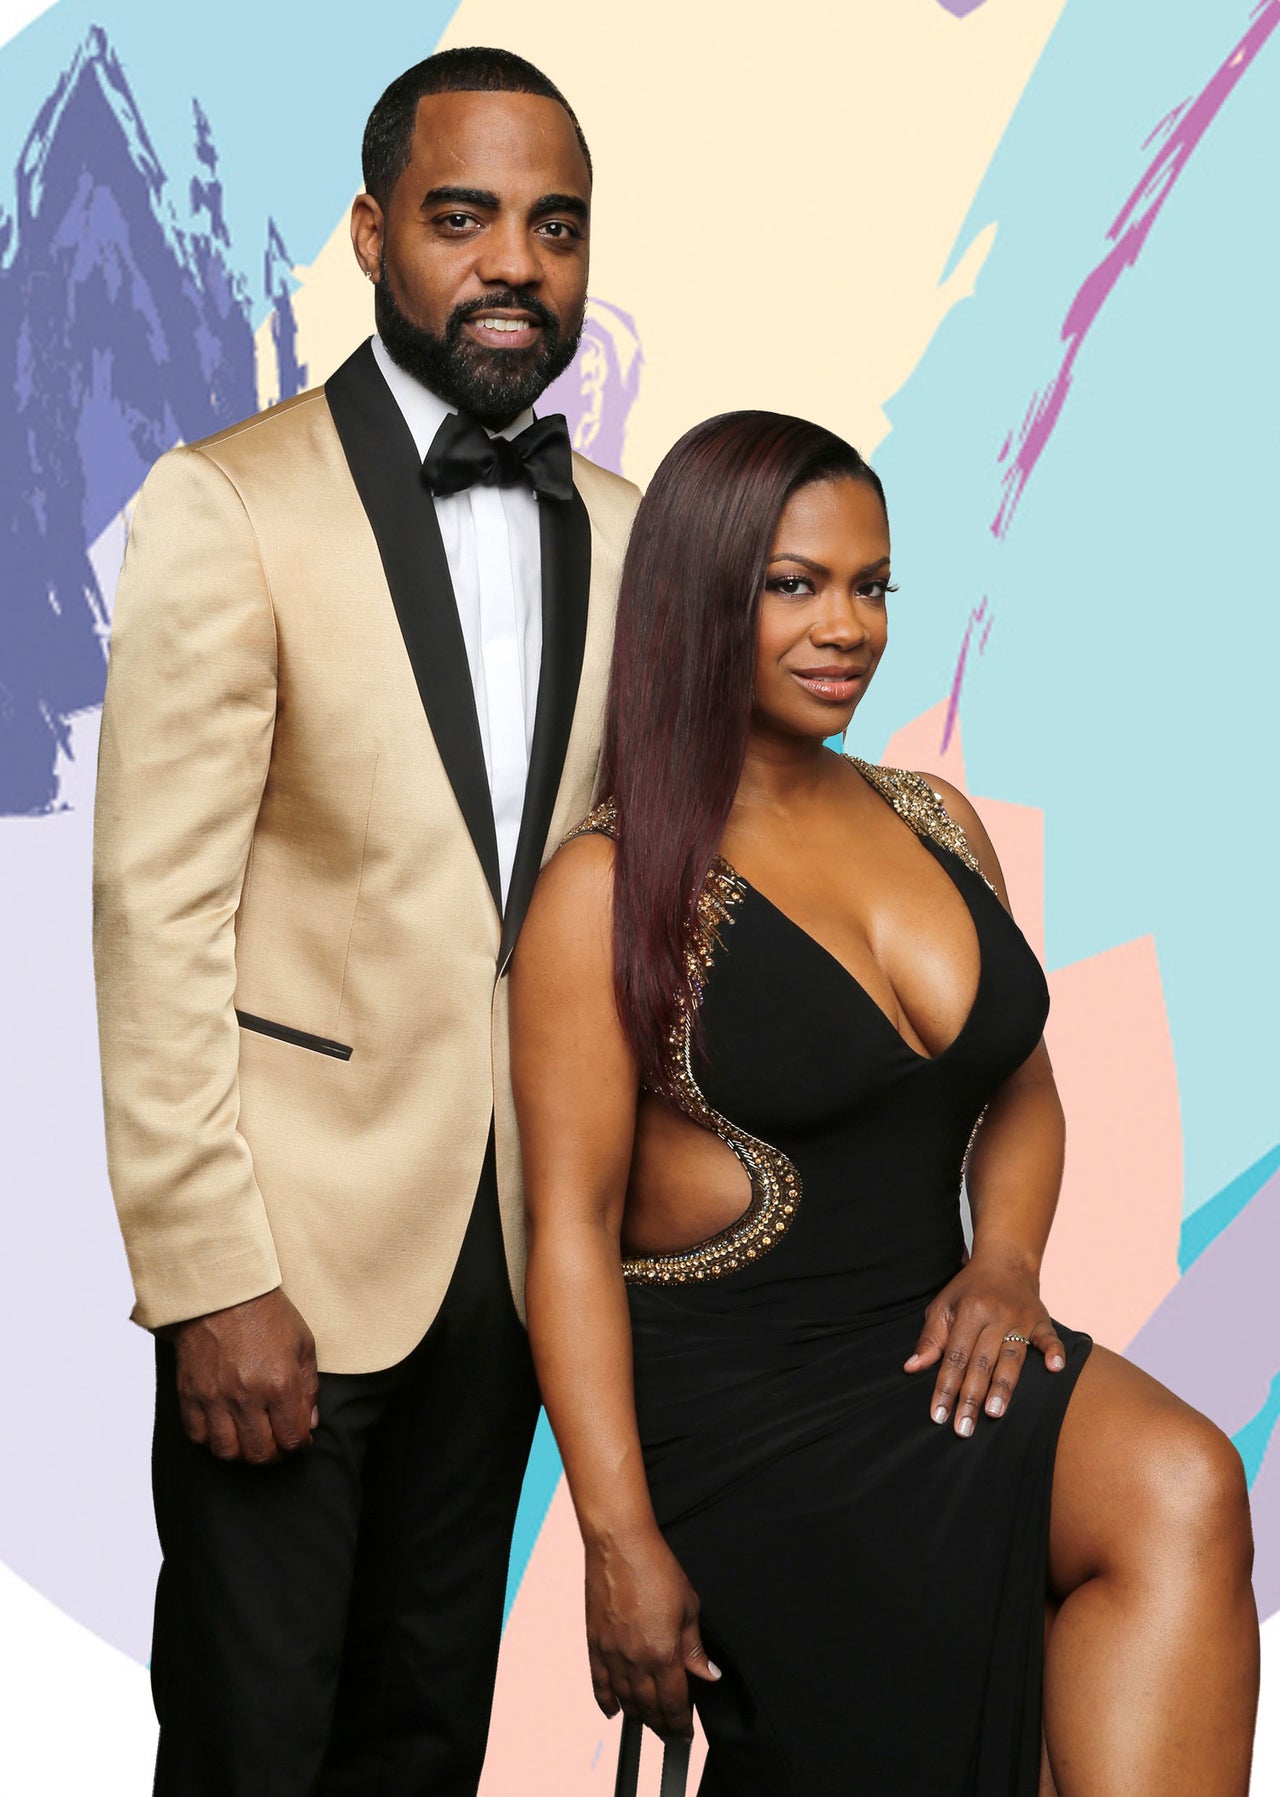 Kandi Burruss Explains Why Her Marriage To Todd Tucker Works: 'I ...